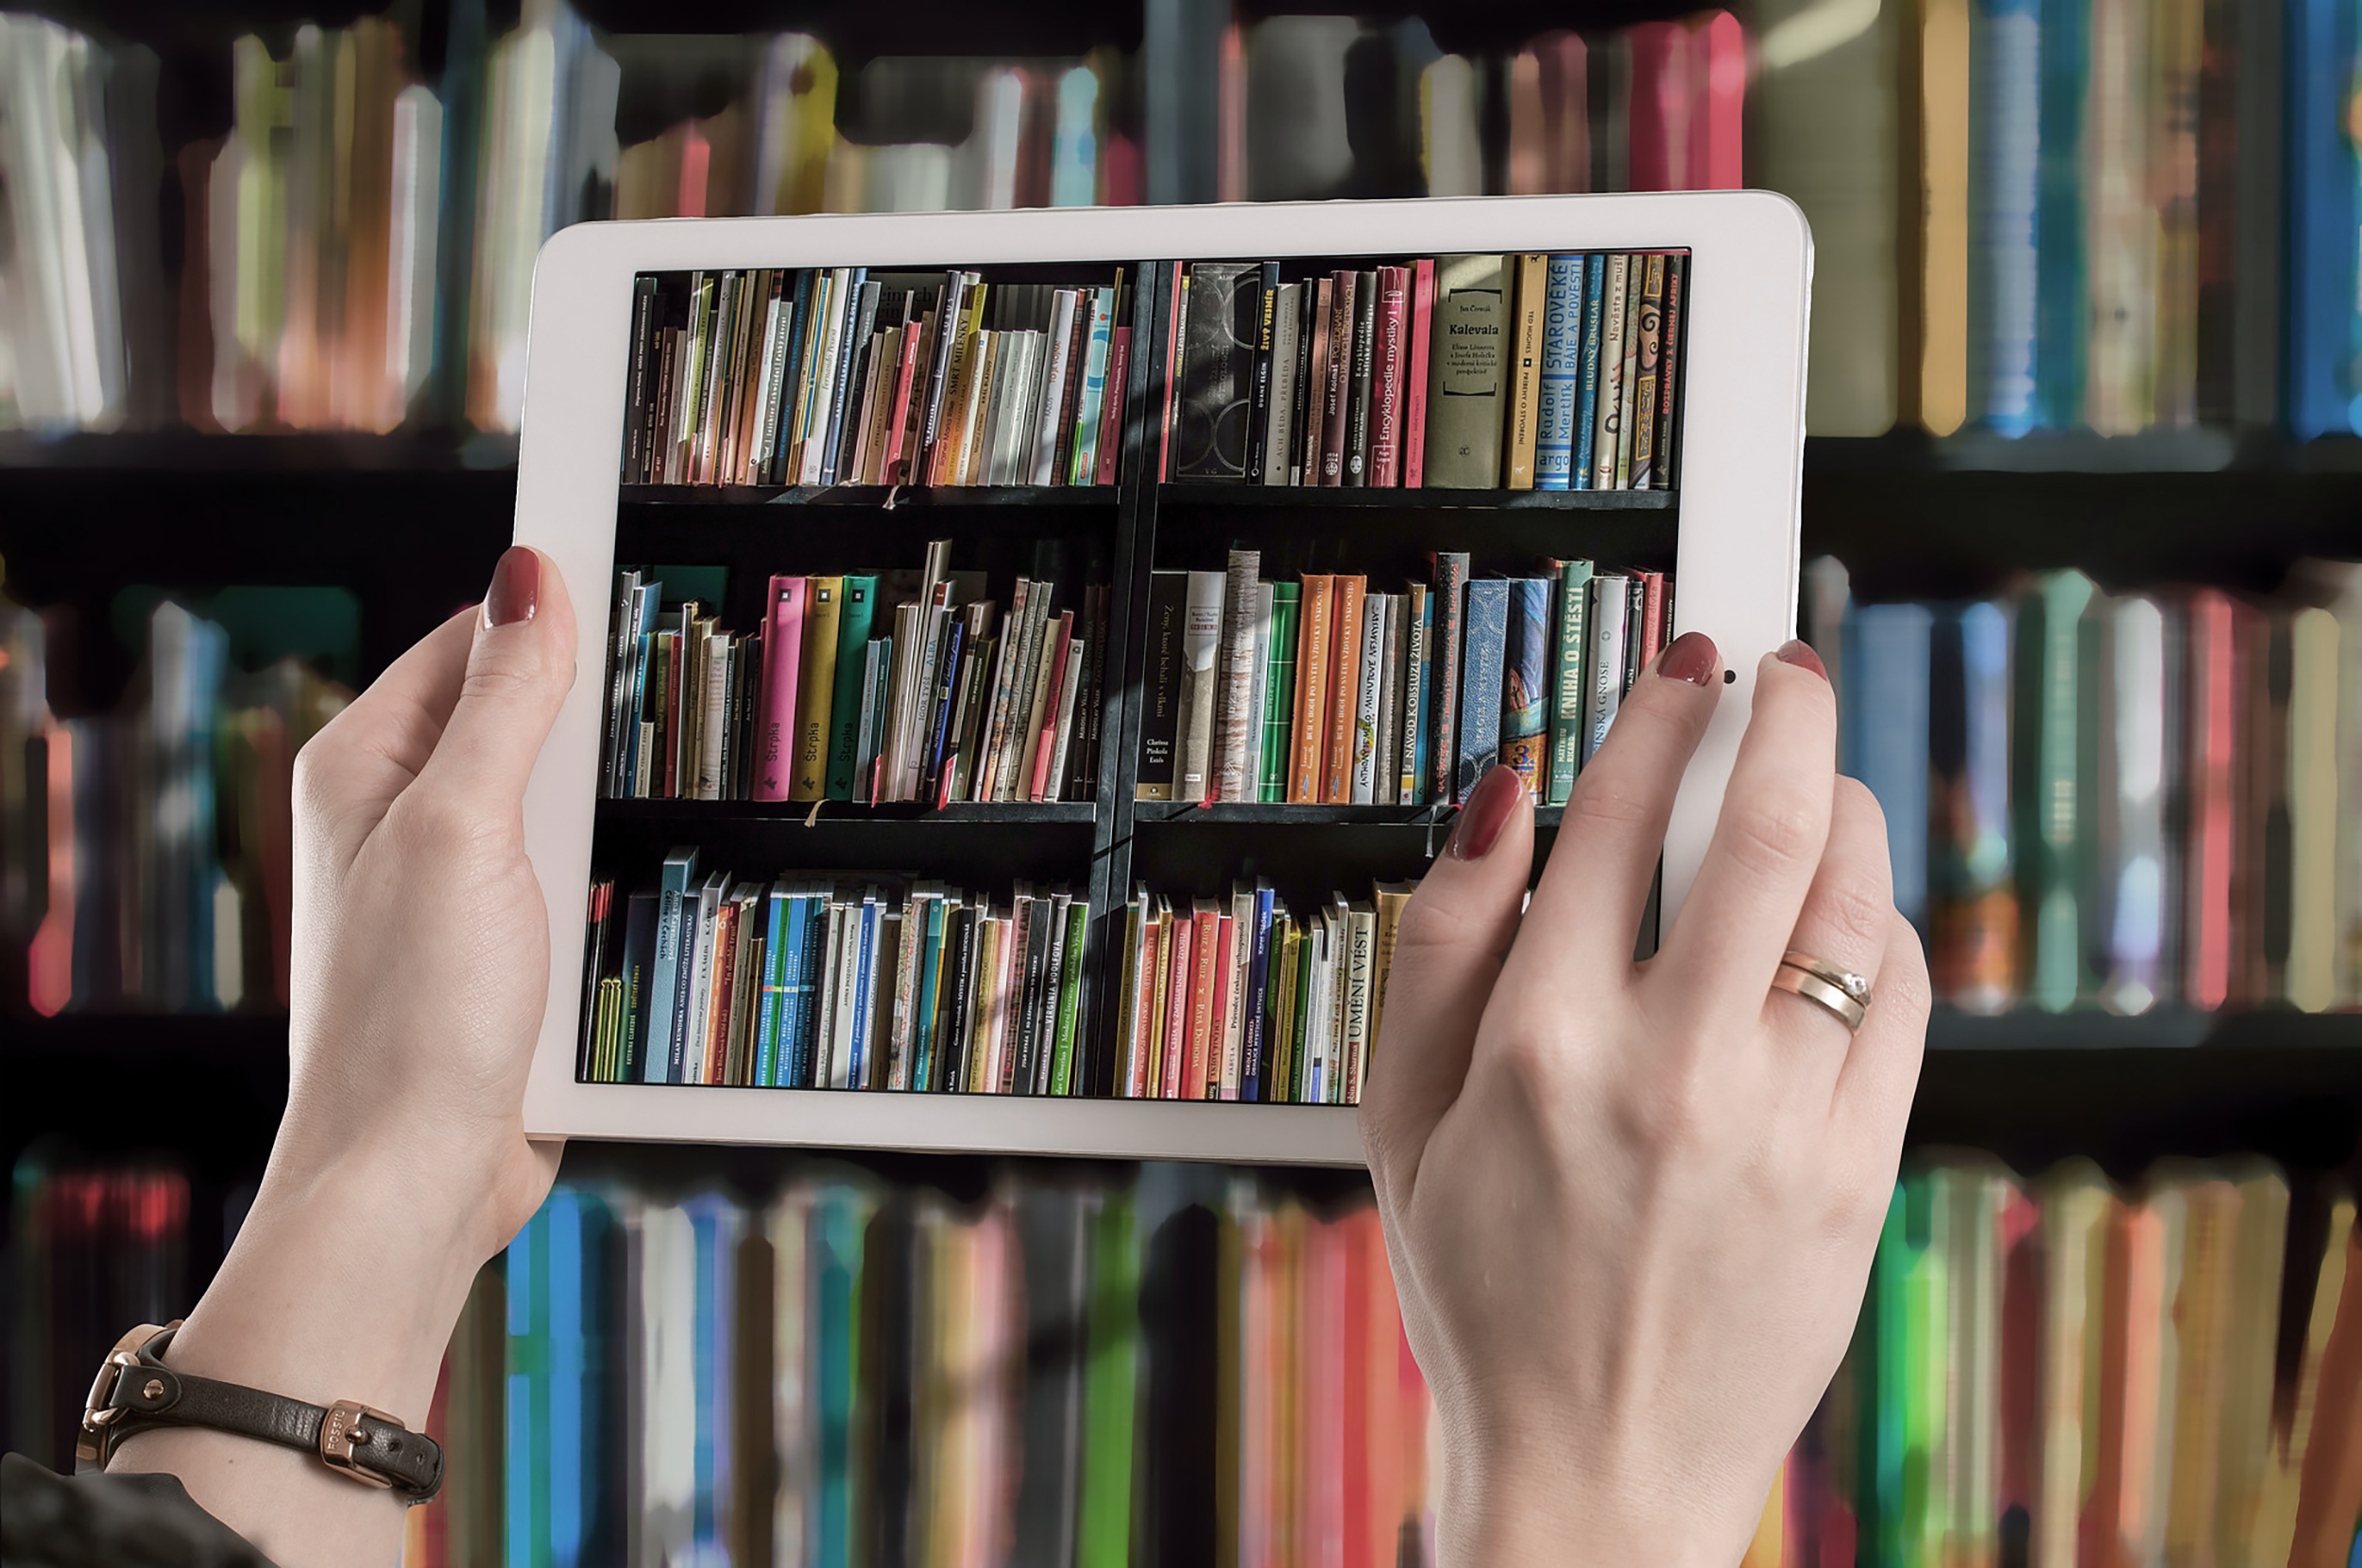 woman hand taking picture of books with an ipad